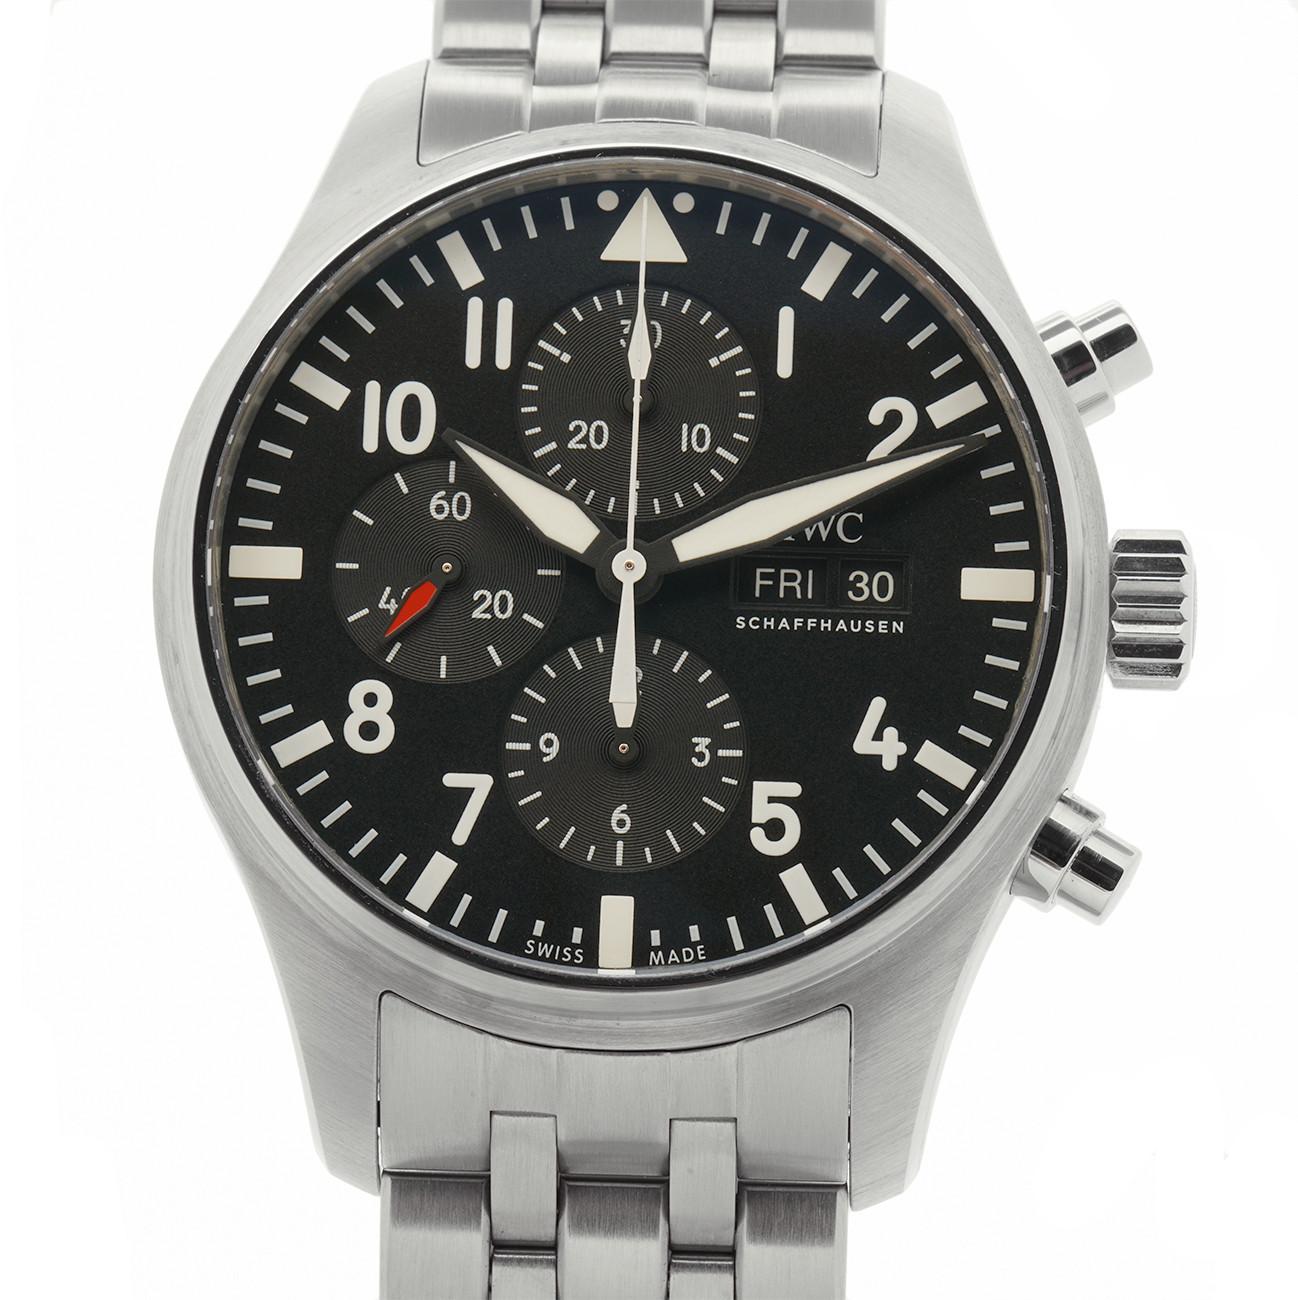 Contemporary IWC Pilot IW377710, Black Dial, Certified and Warranty